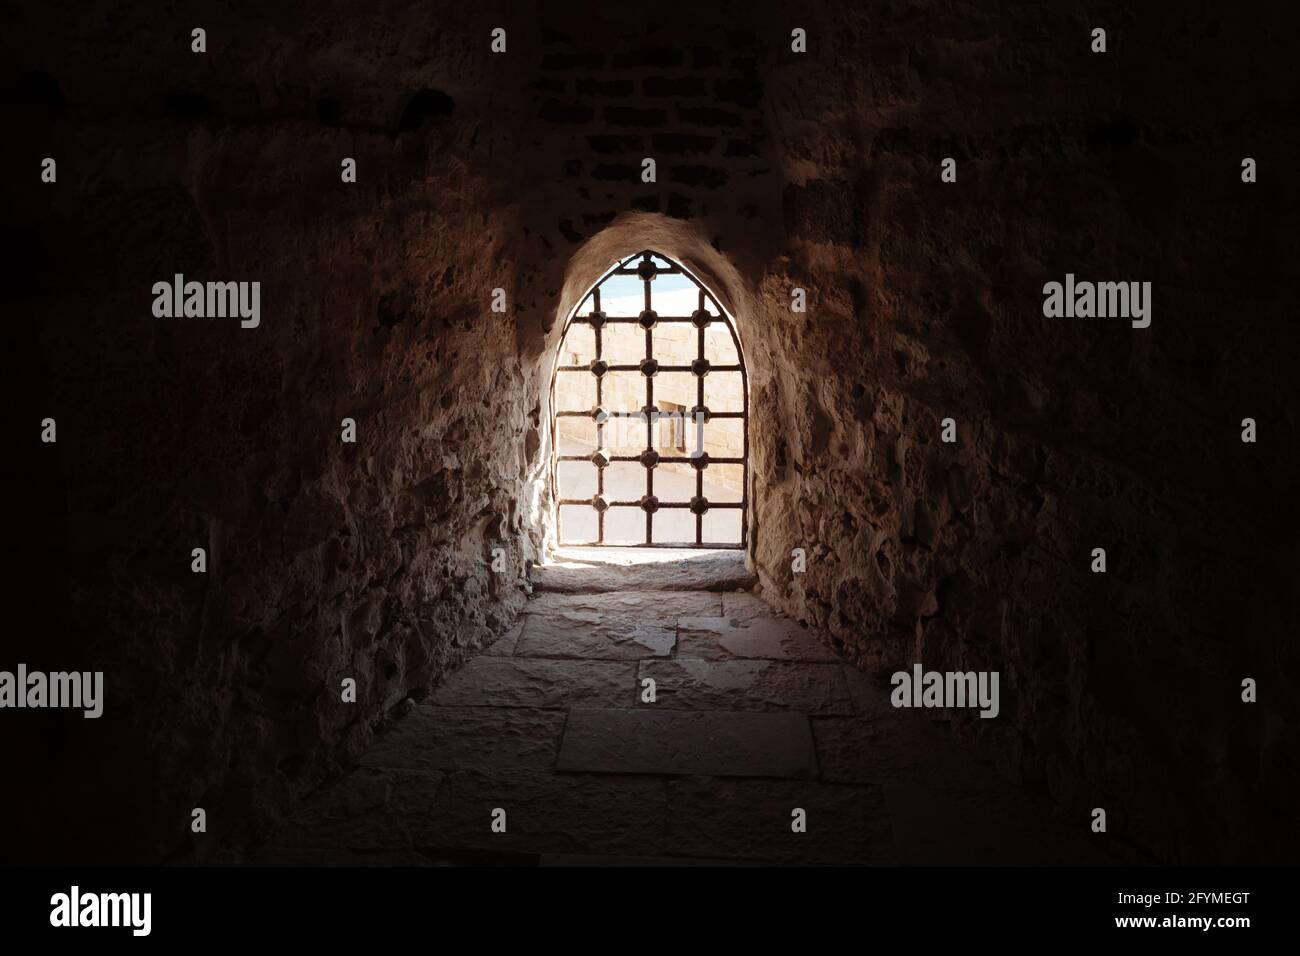 Window with bars in the old fortress, dark architectural background Stock Photo